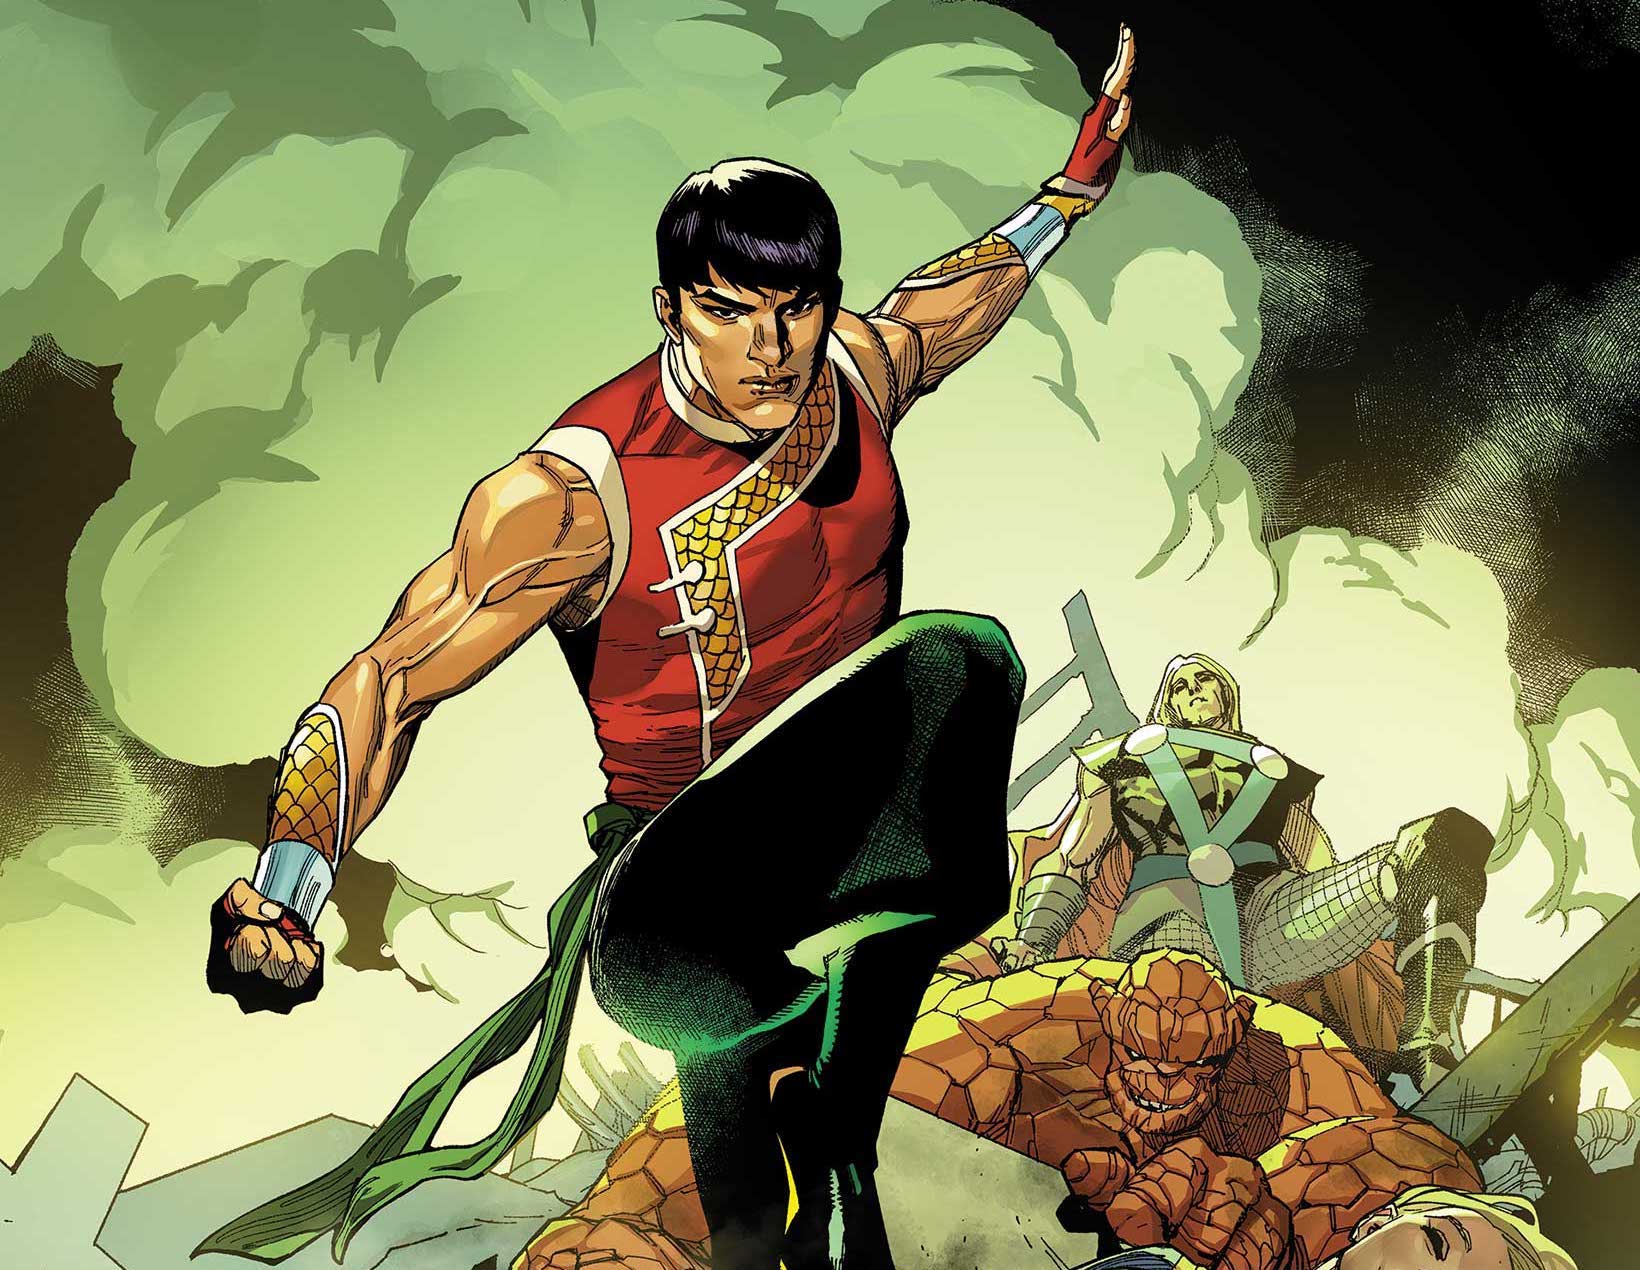 'Shang-Chi' #1 offers an exciting, must-read take on the character